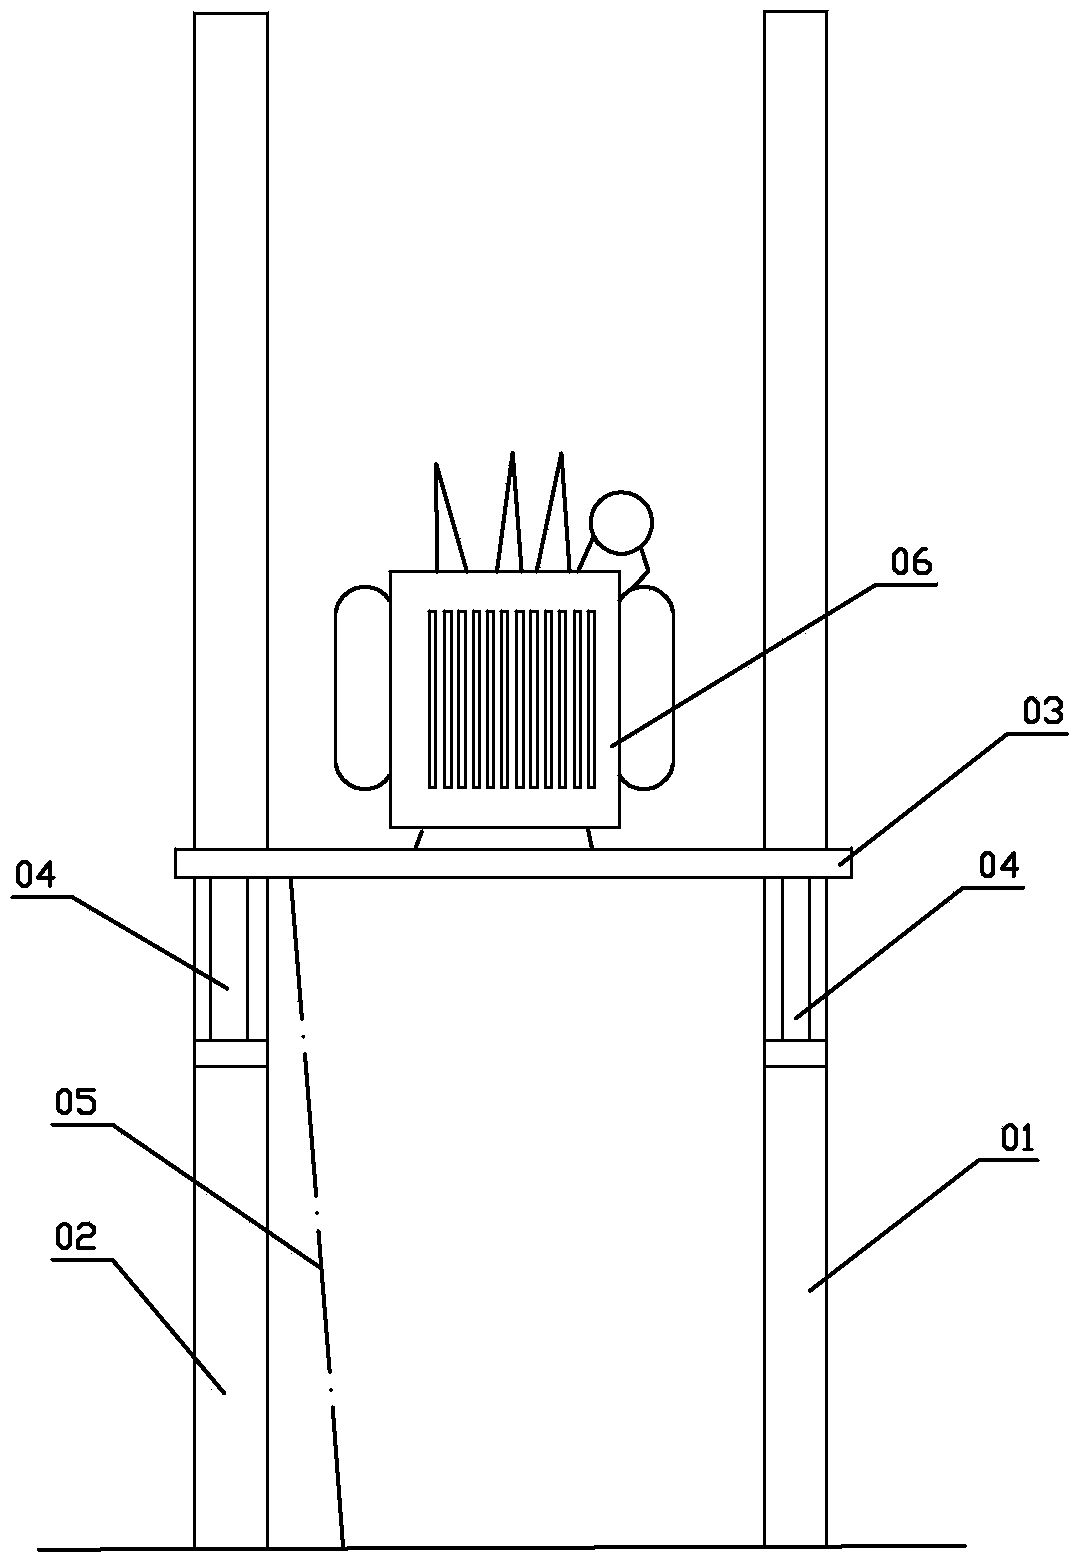 Power transformer outdoor installation supporting device